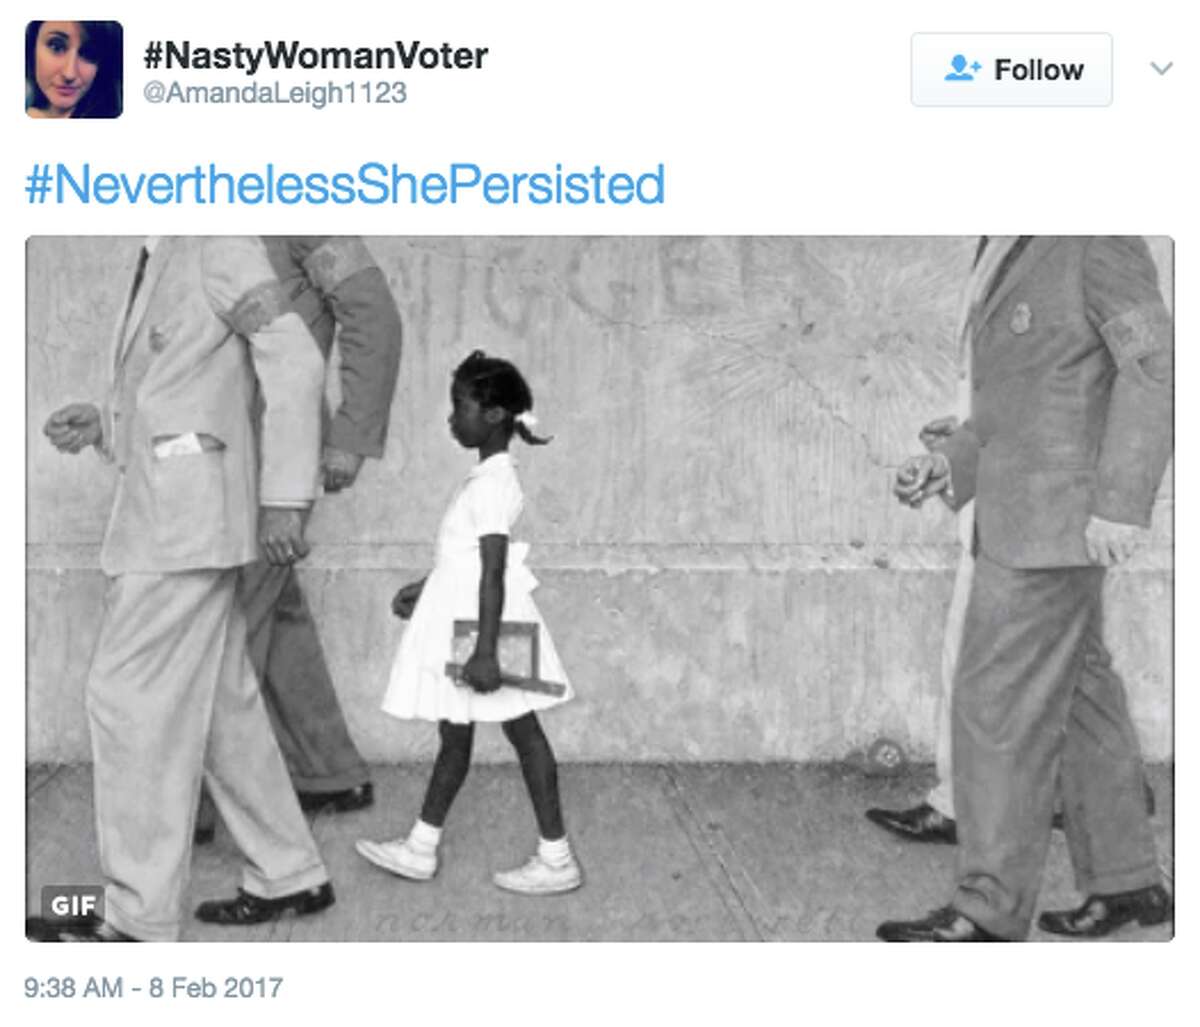 Senate Majority Leader Mitch McConnell's silencing of Sen. Elizabeth Warren (D-Mass.) in the middle of a speech criticizing attorney general nominee Sen. Jeff Sessions (R-Ala.) unleashed a new feminist battle cry: "Nevertheless, she persisted!"